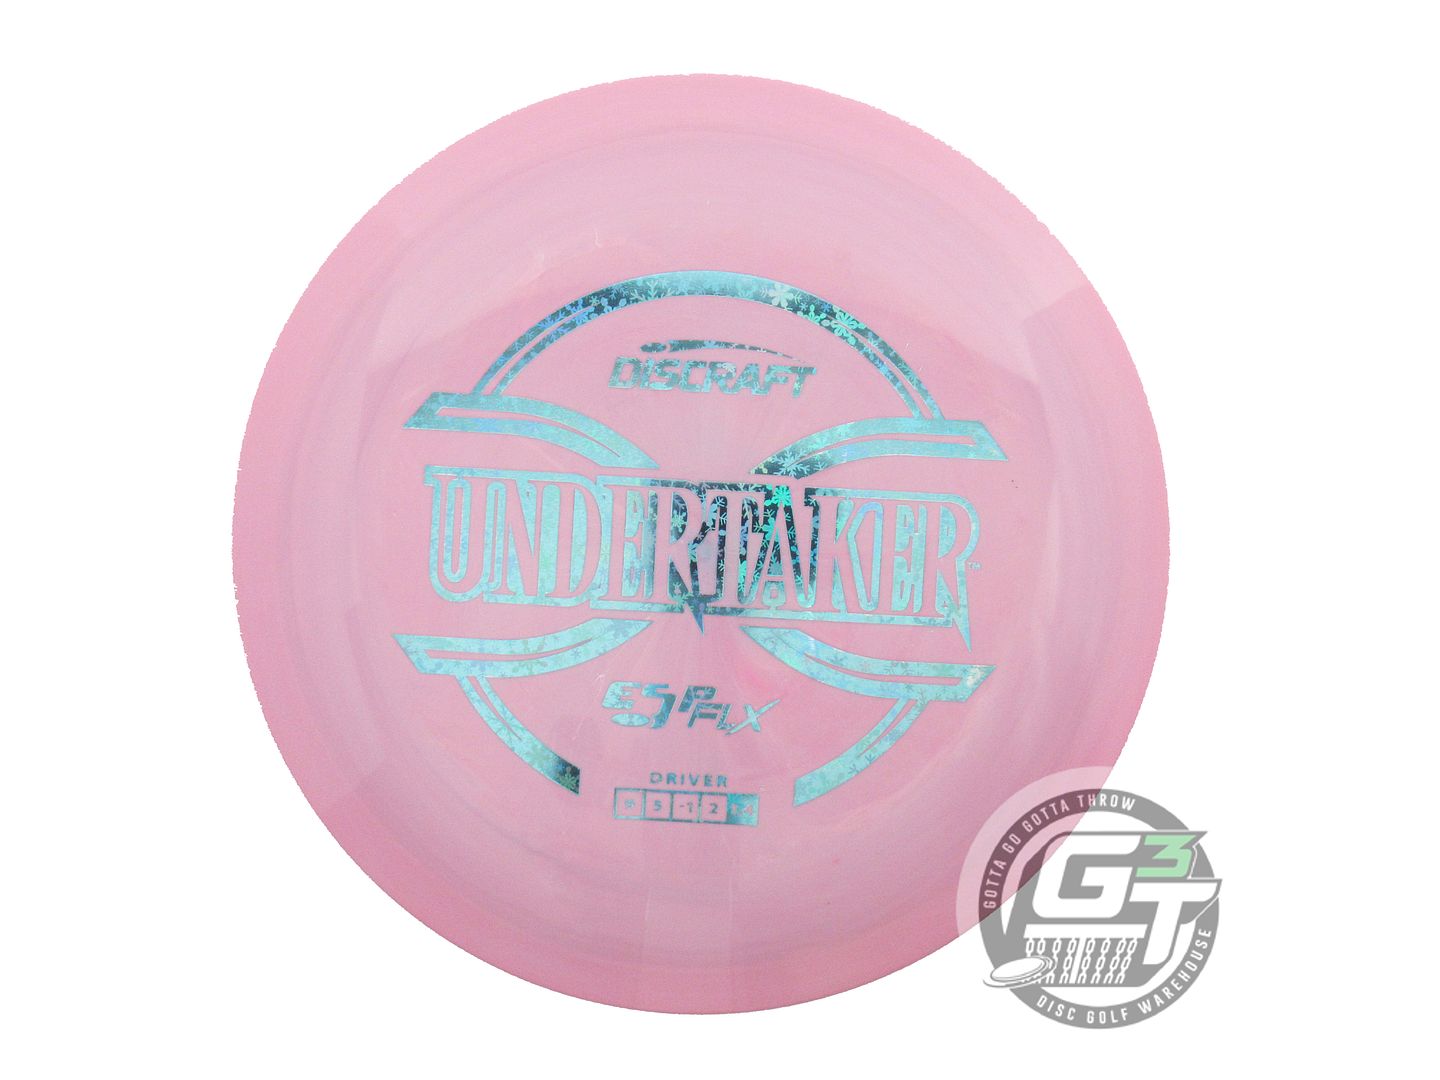 Discraft ESP FLX Undertaker Distance Driver Golf Disc (Individually Listed)